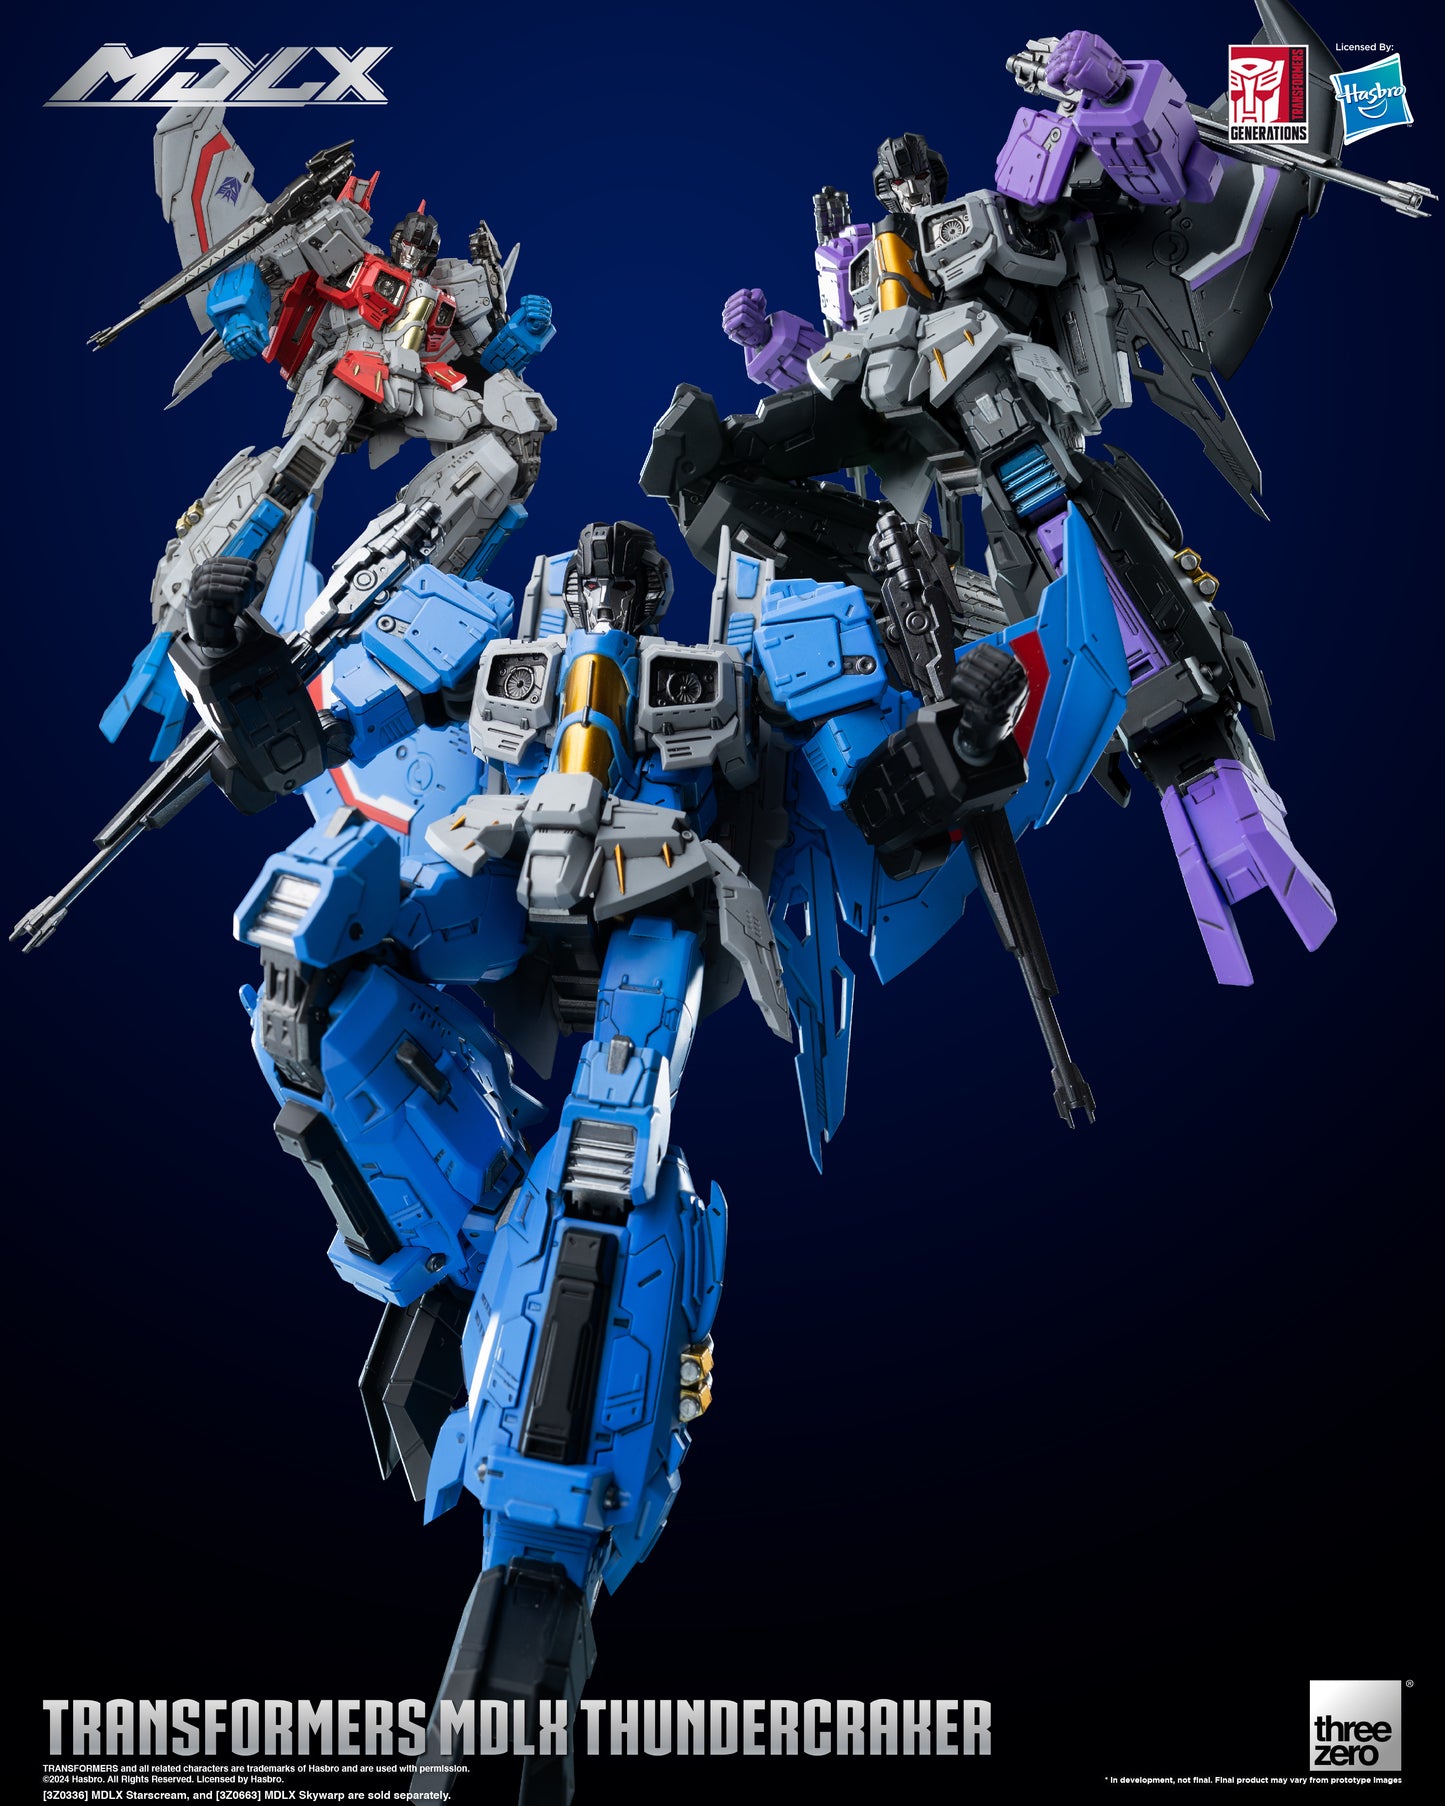 Transformers MDLX Articulated Figure Series Thundercracker all three jets